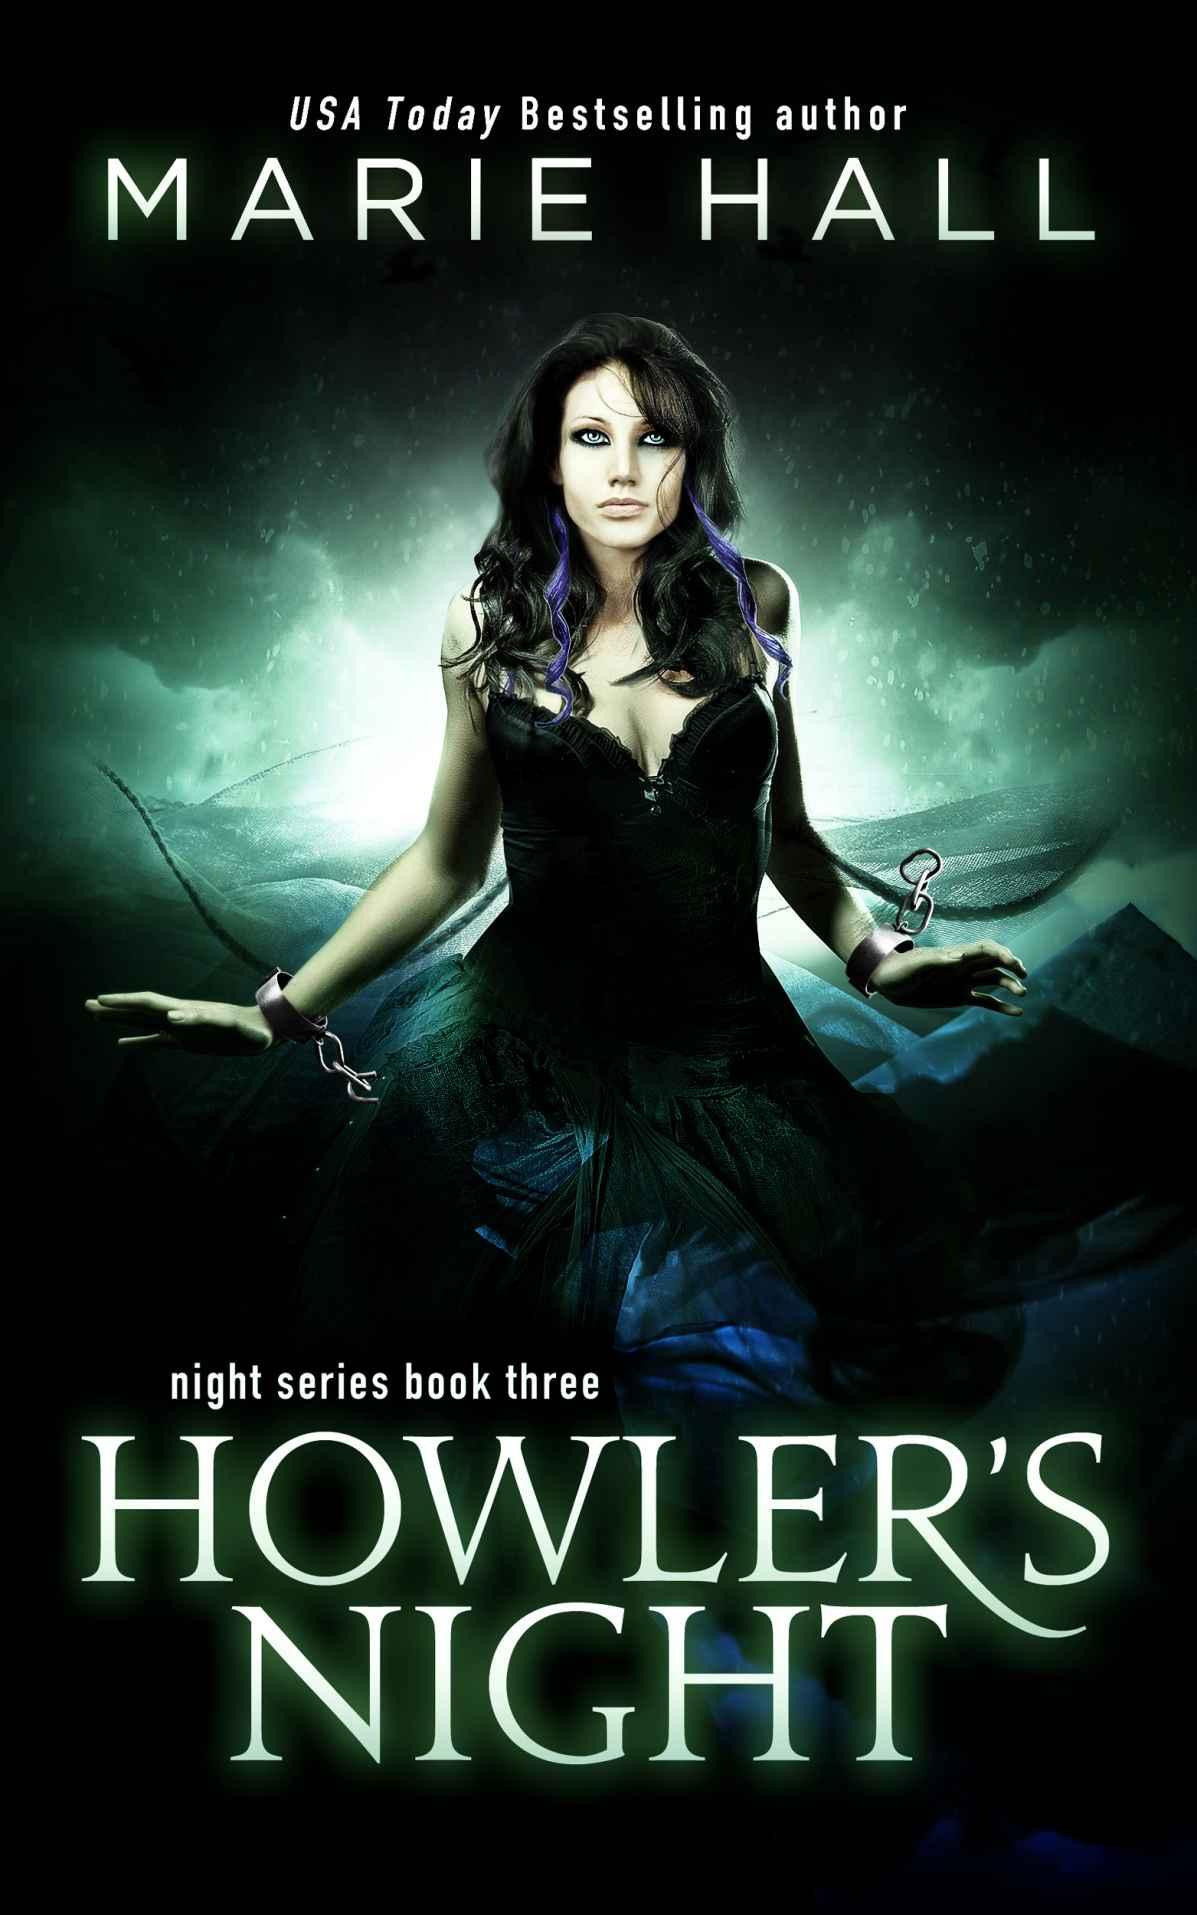 Howler's Night by Marie Hall